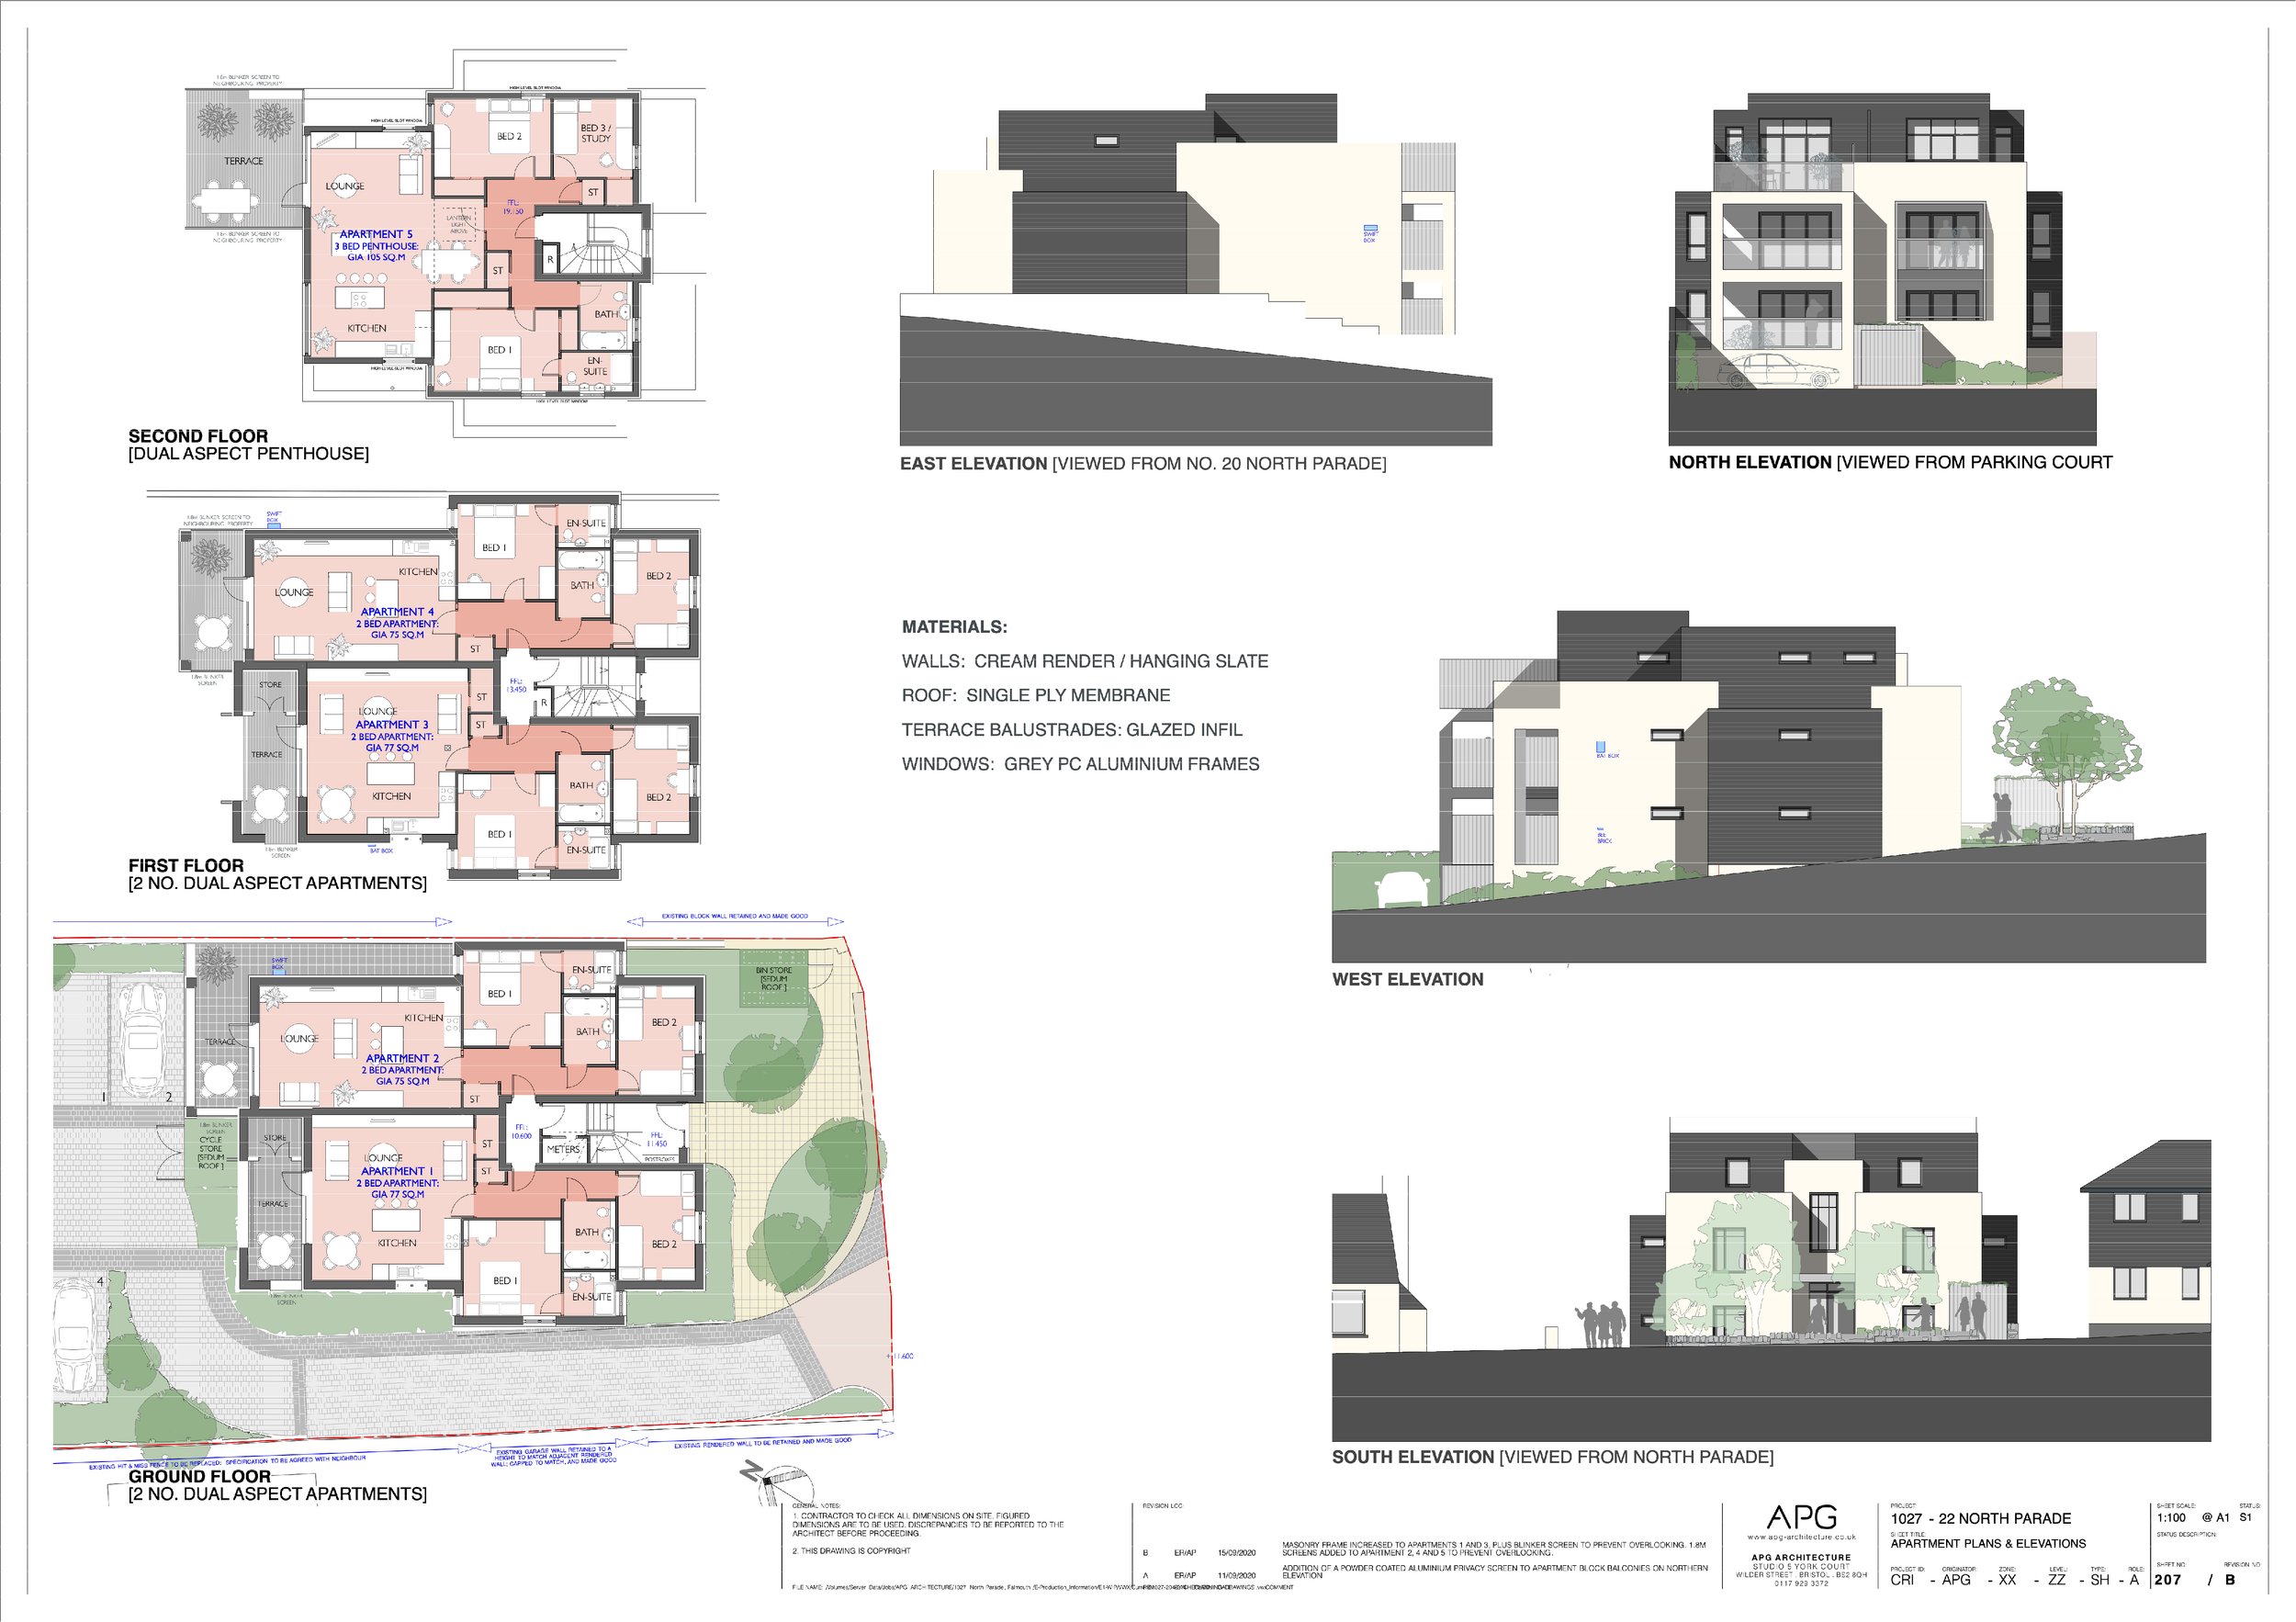 APG_Architecture_North_Parade_Falmouth_Elevations_03.jpg